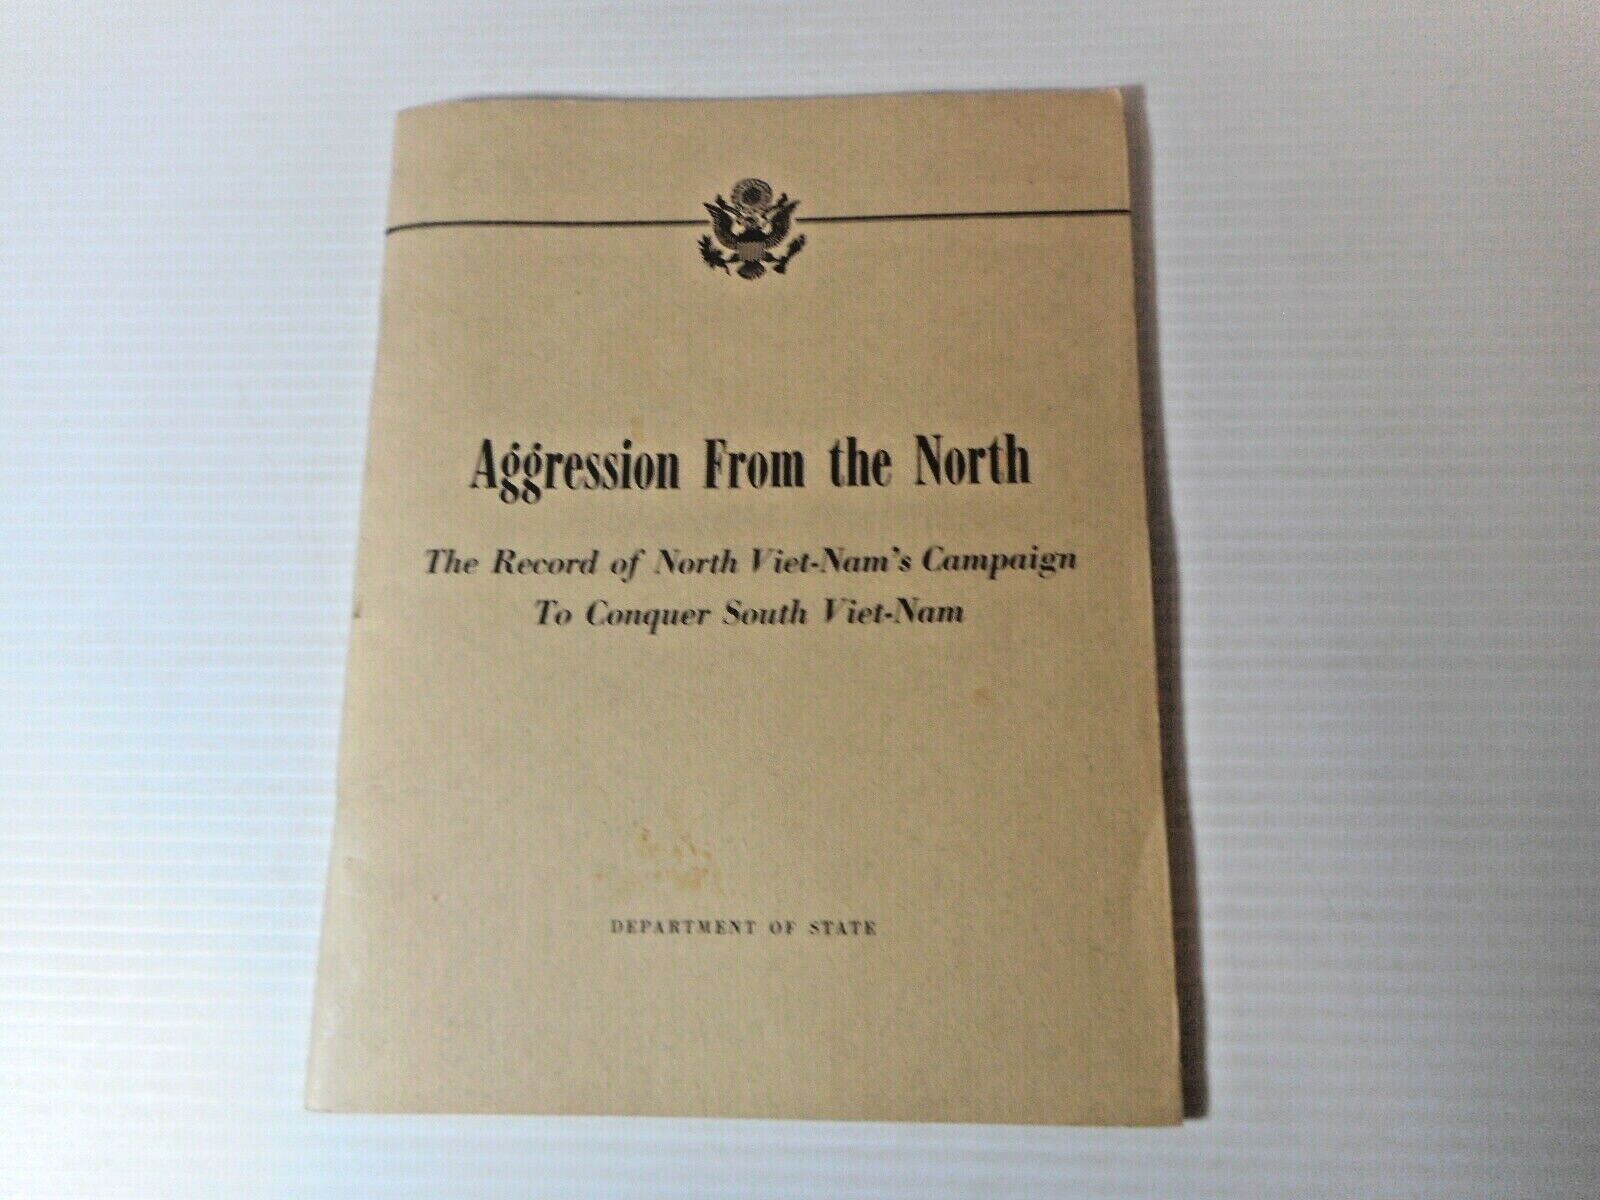 Aggression from the North Rec of Viet-Nam\'s Campaign to Conquer S Viet 1965 E-59